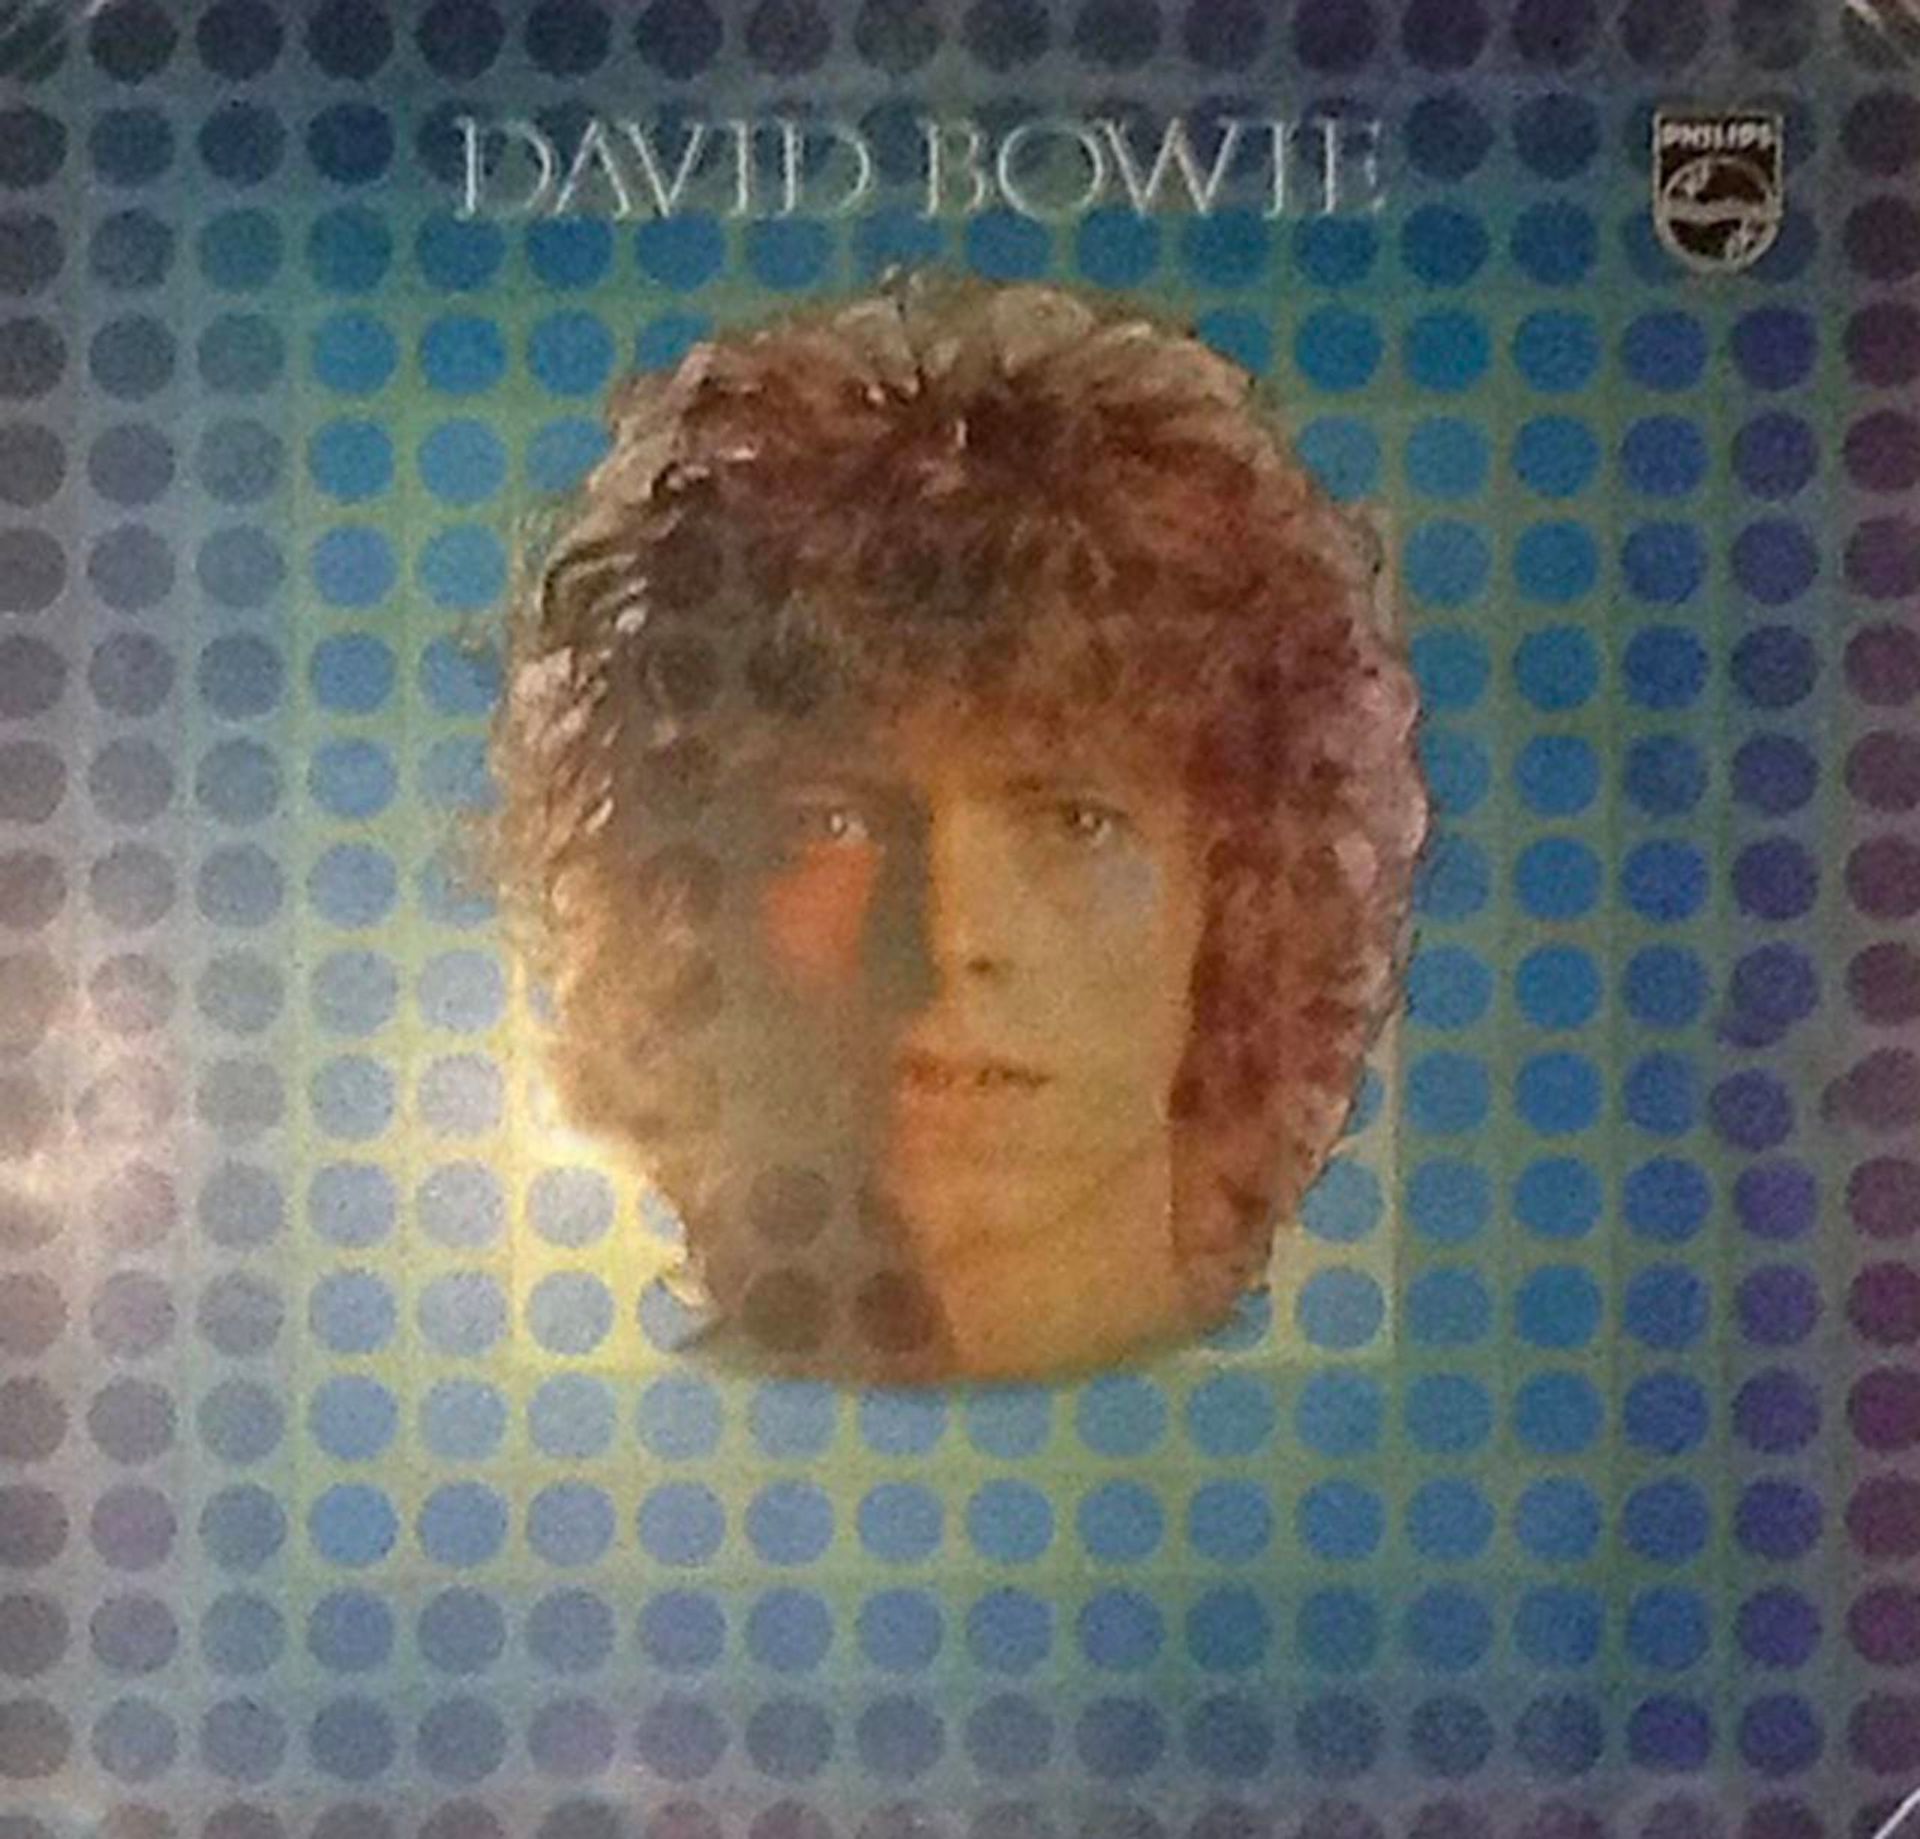 David Bowie's head floating against a blue and purple op art background of repeating circles.